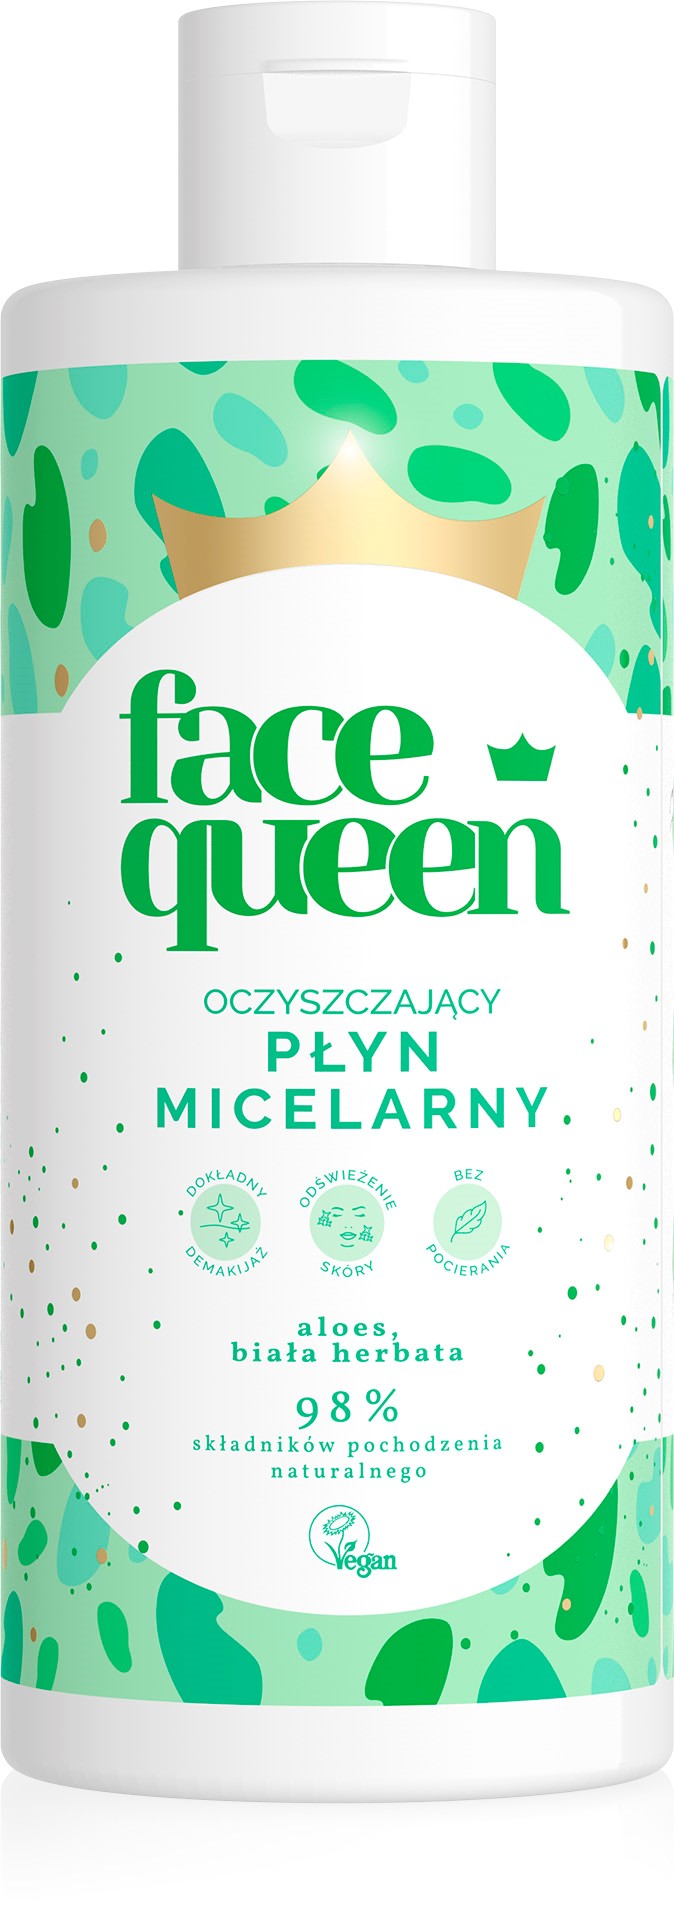 Face Queen Cleansing micellar water